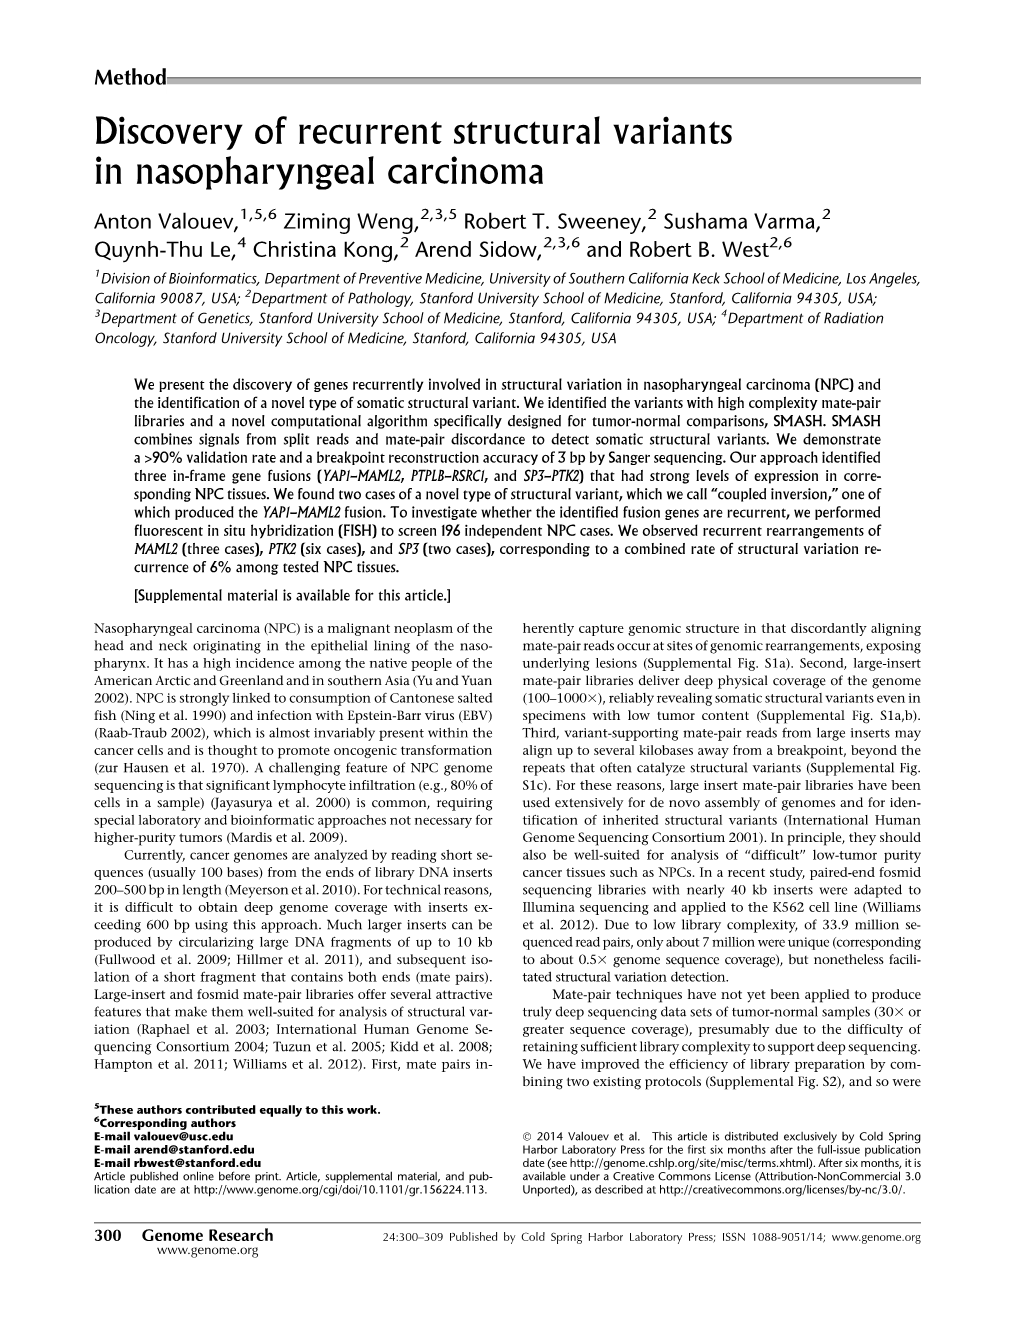 Discovery of Recurrent Structural Variants in Nasopharyngeal Carcinoma